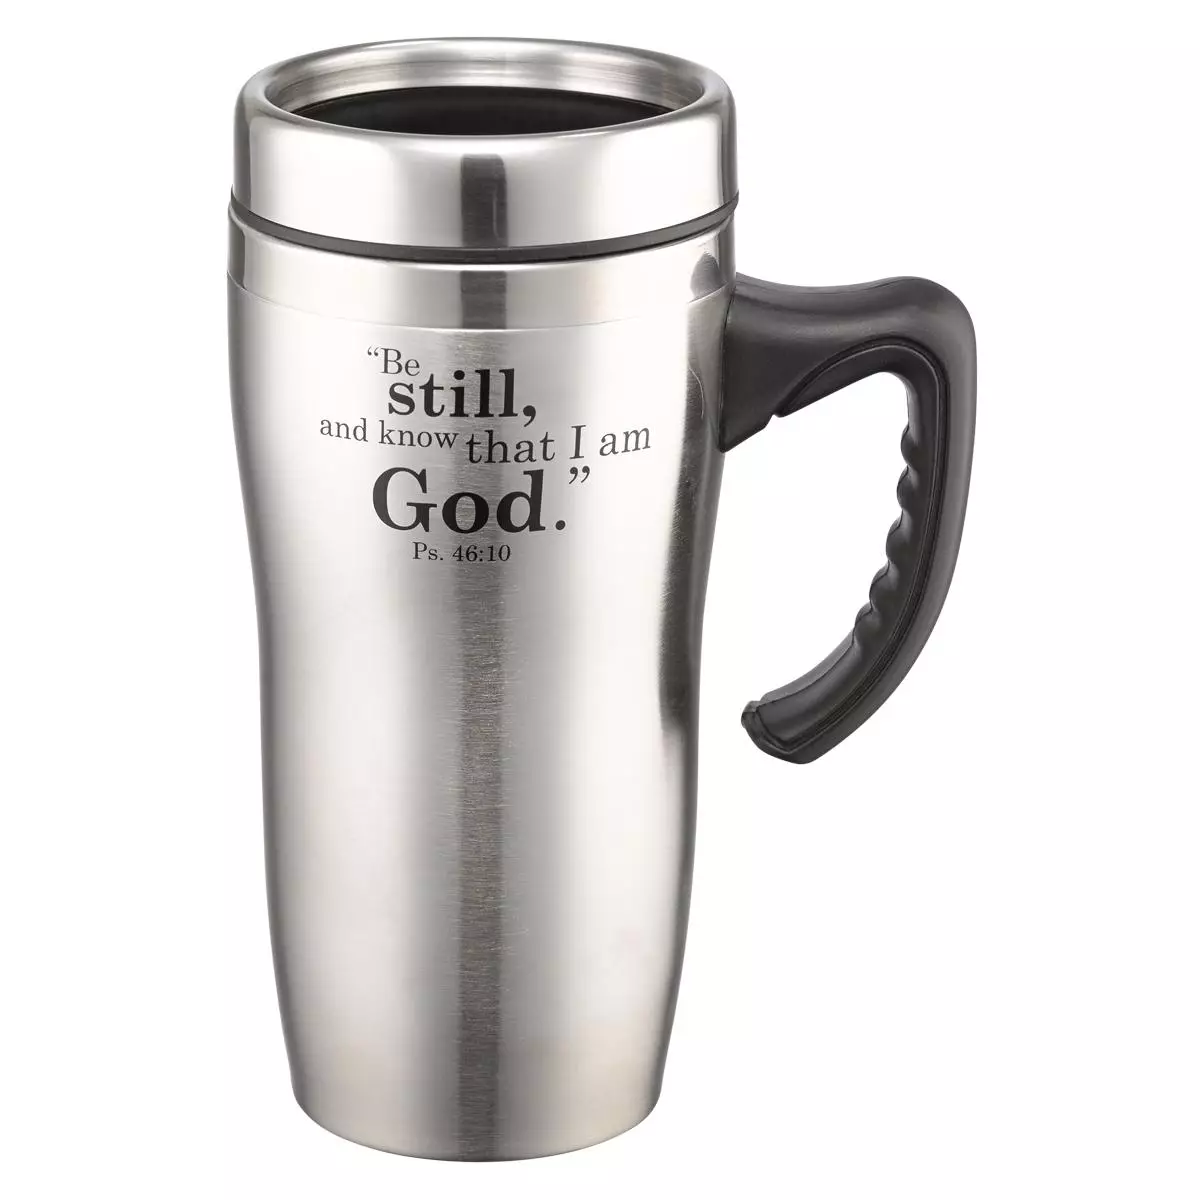 Be Still and Know Psalm 46:10 Stainless Steel Travel Mug